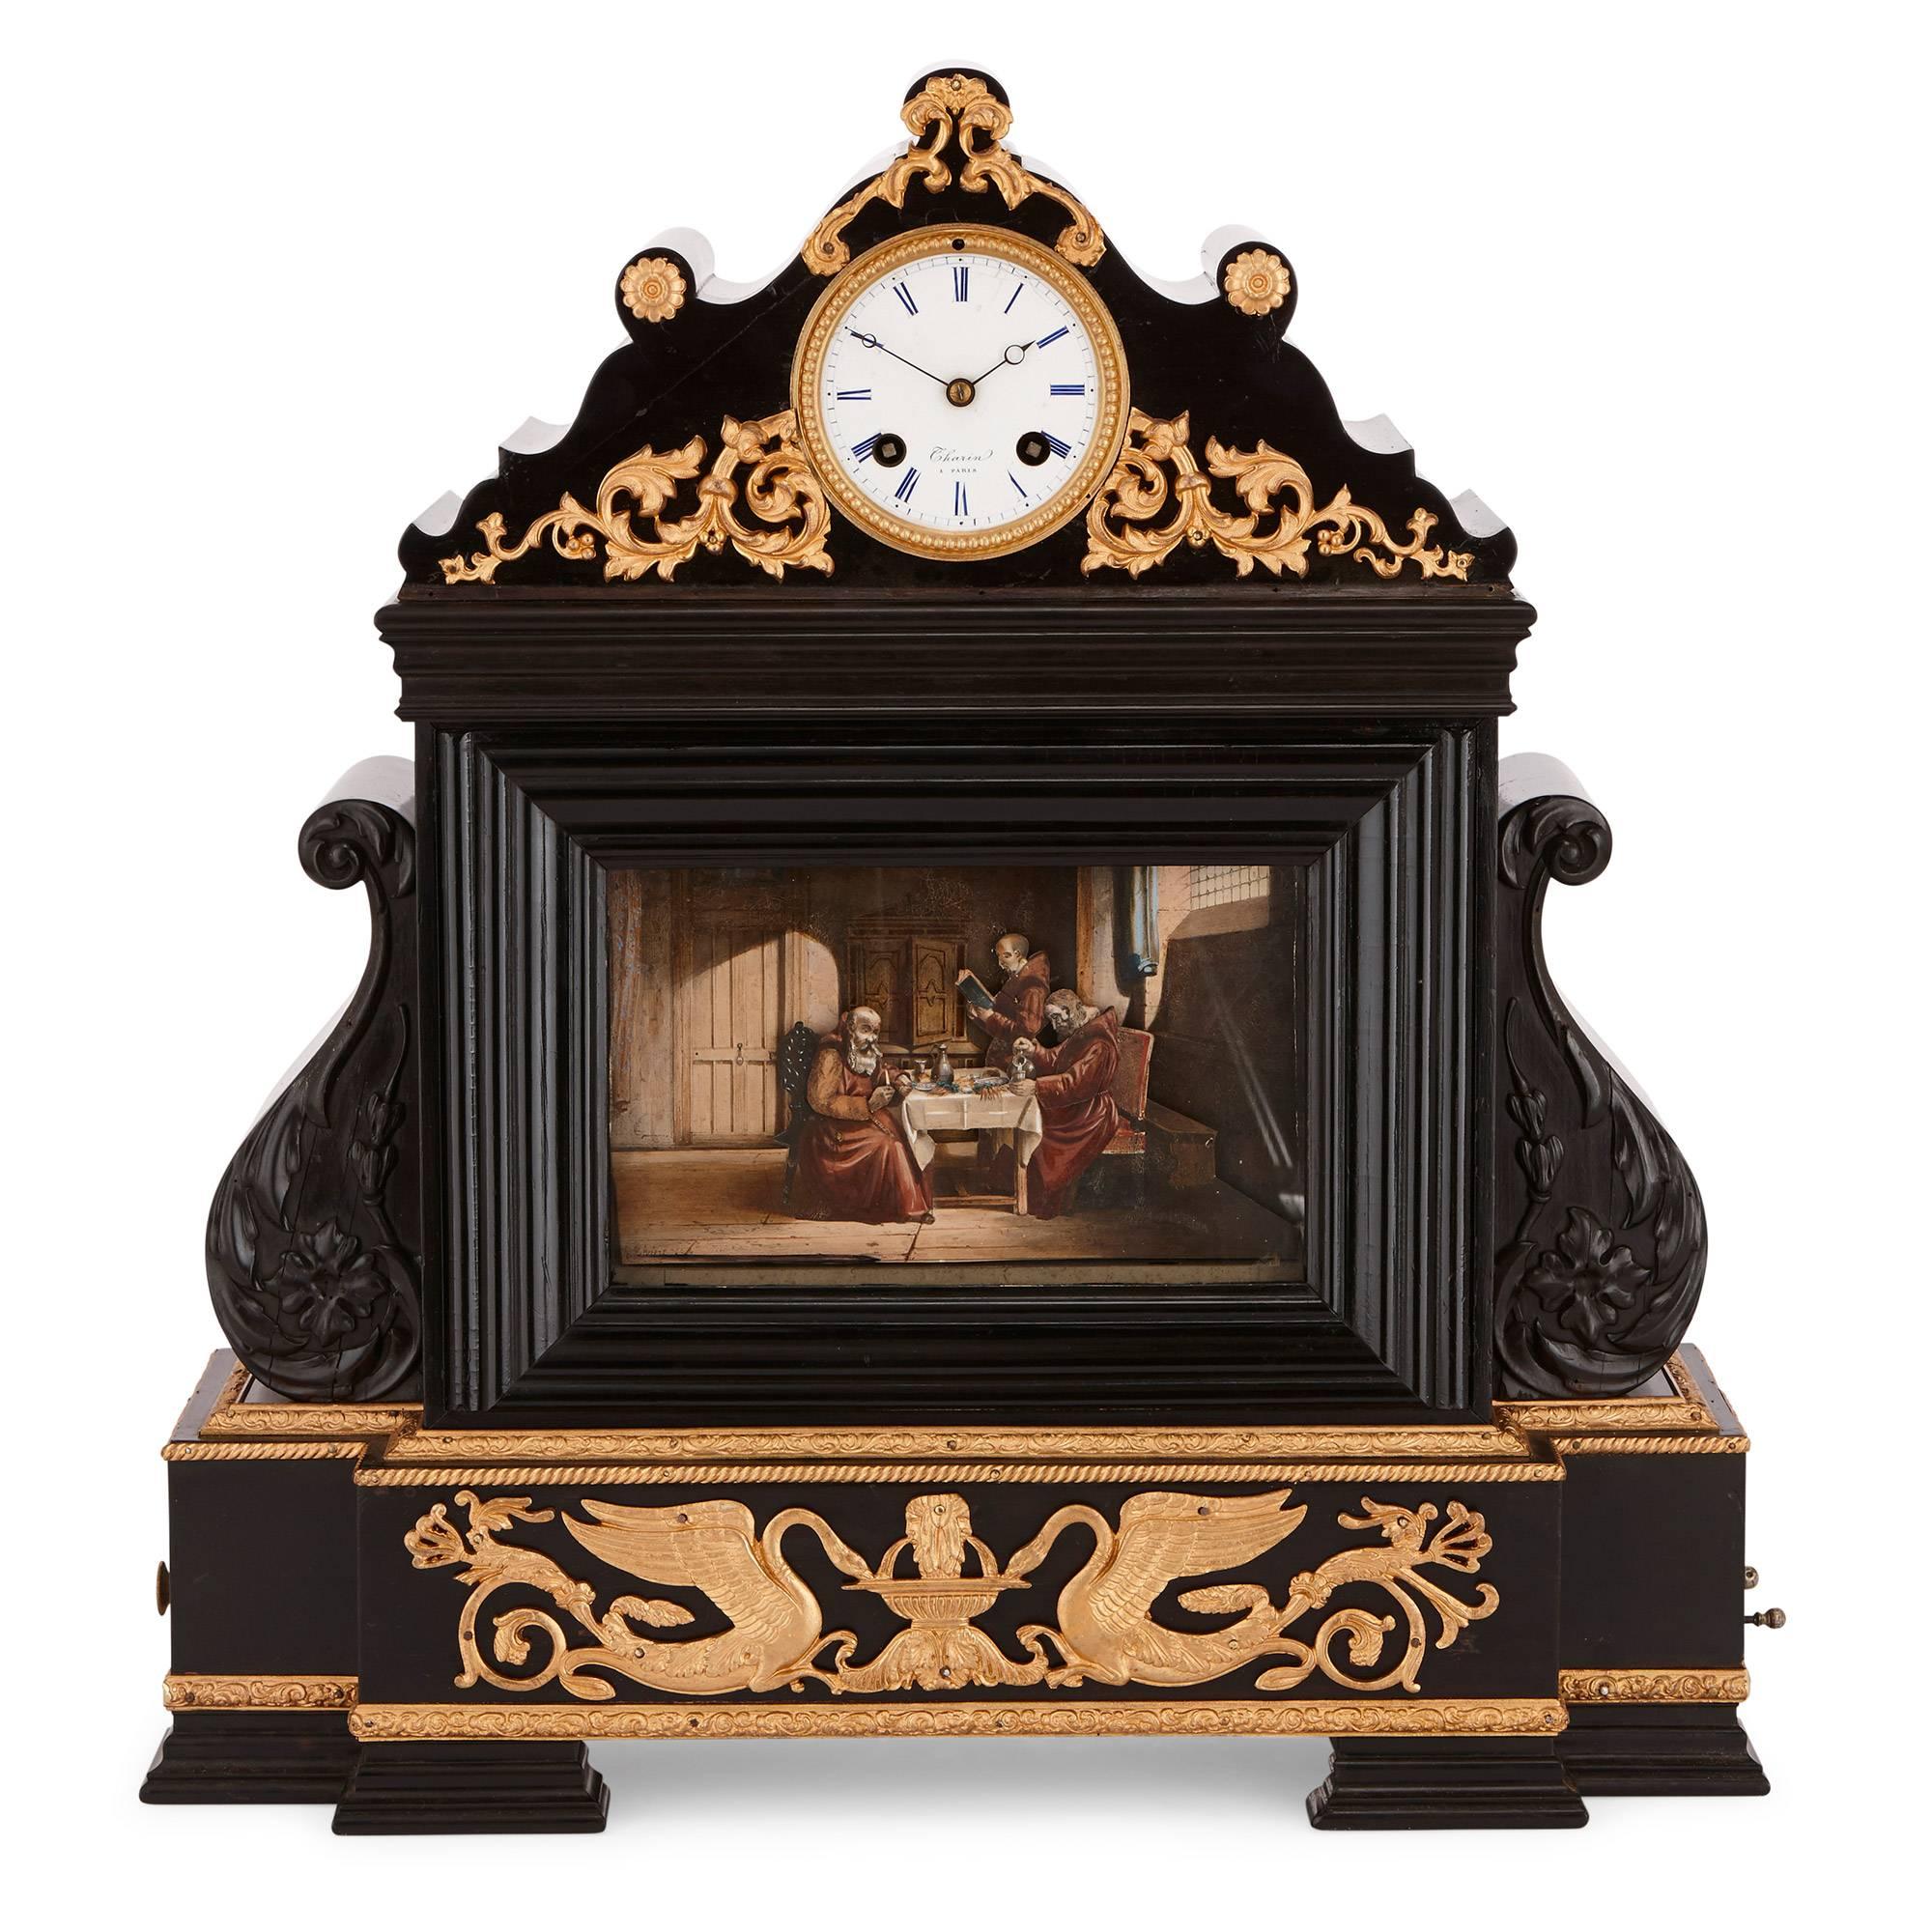 This fine, antique mantel clock is constructed in ebonised wood by the renowned Parisian maker of automata, Xavier Tharin (French, active mid 19th Century). The clock face is set onto a curled, stylized pediment atop the clock case. The face is of